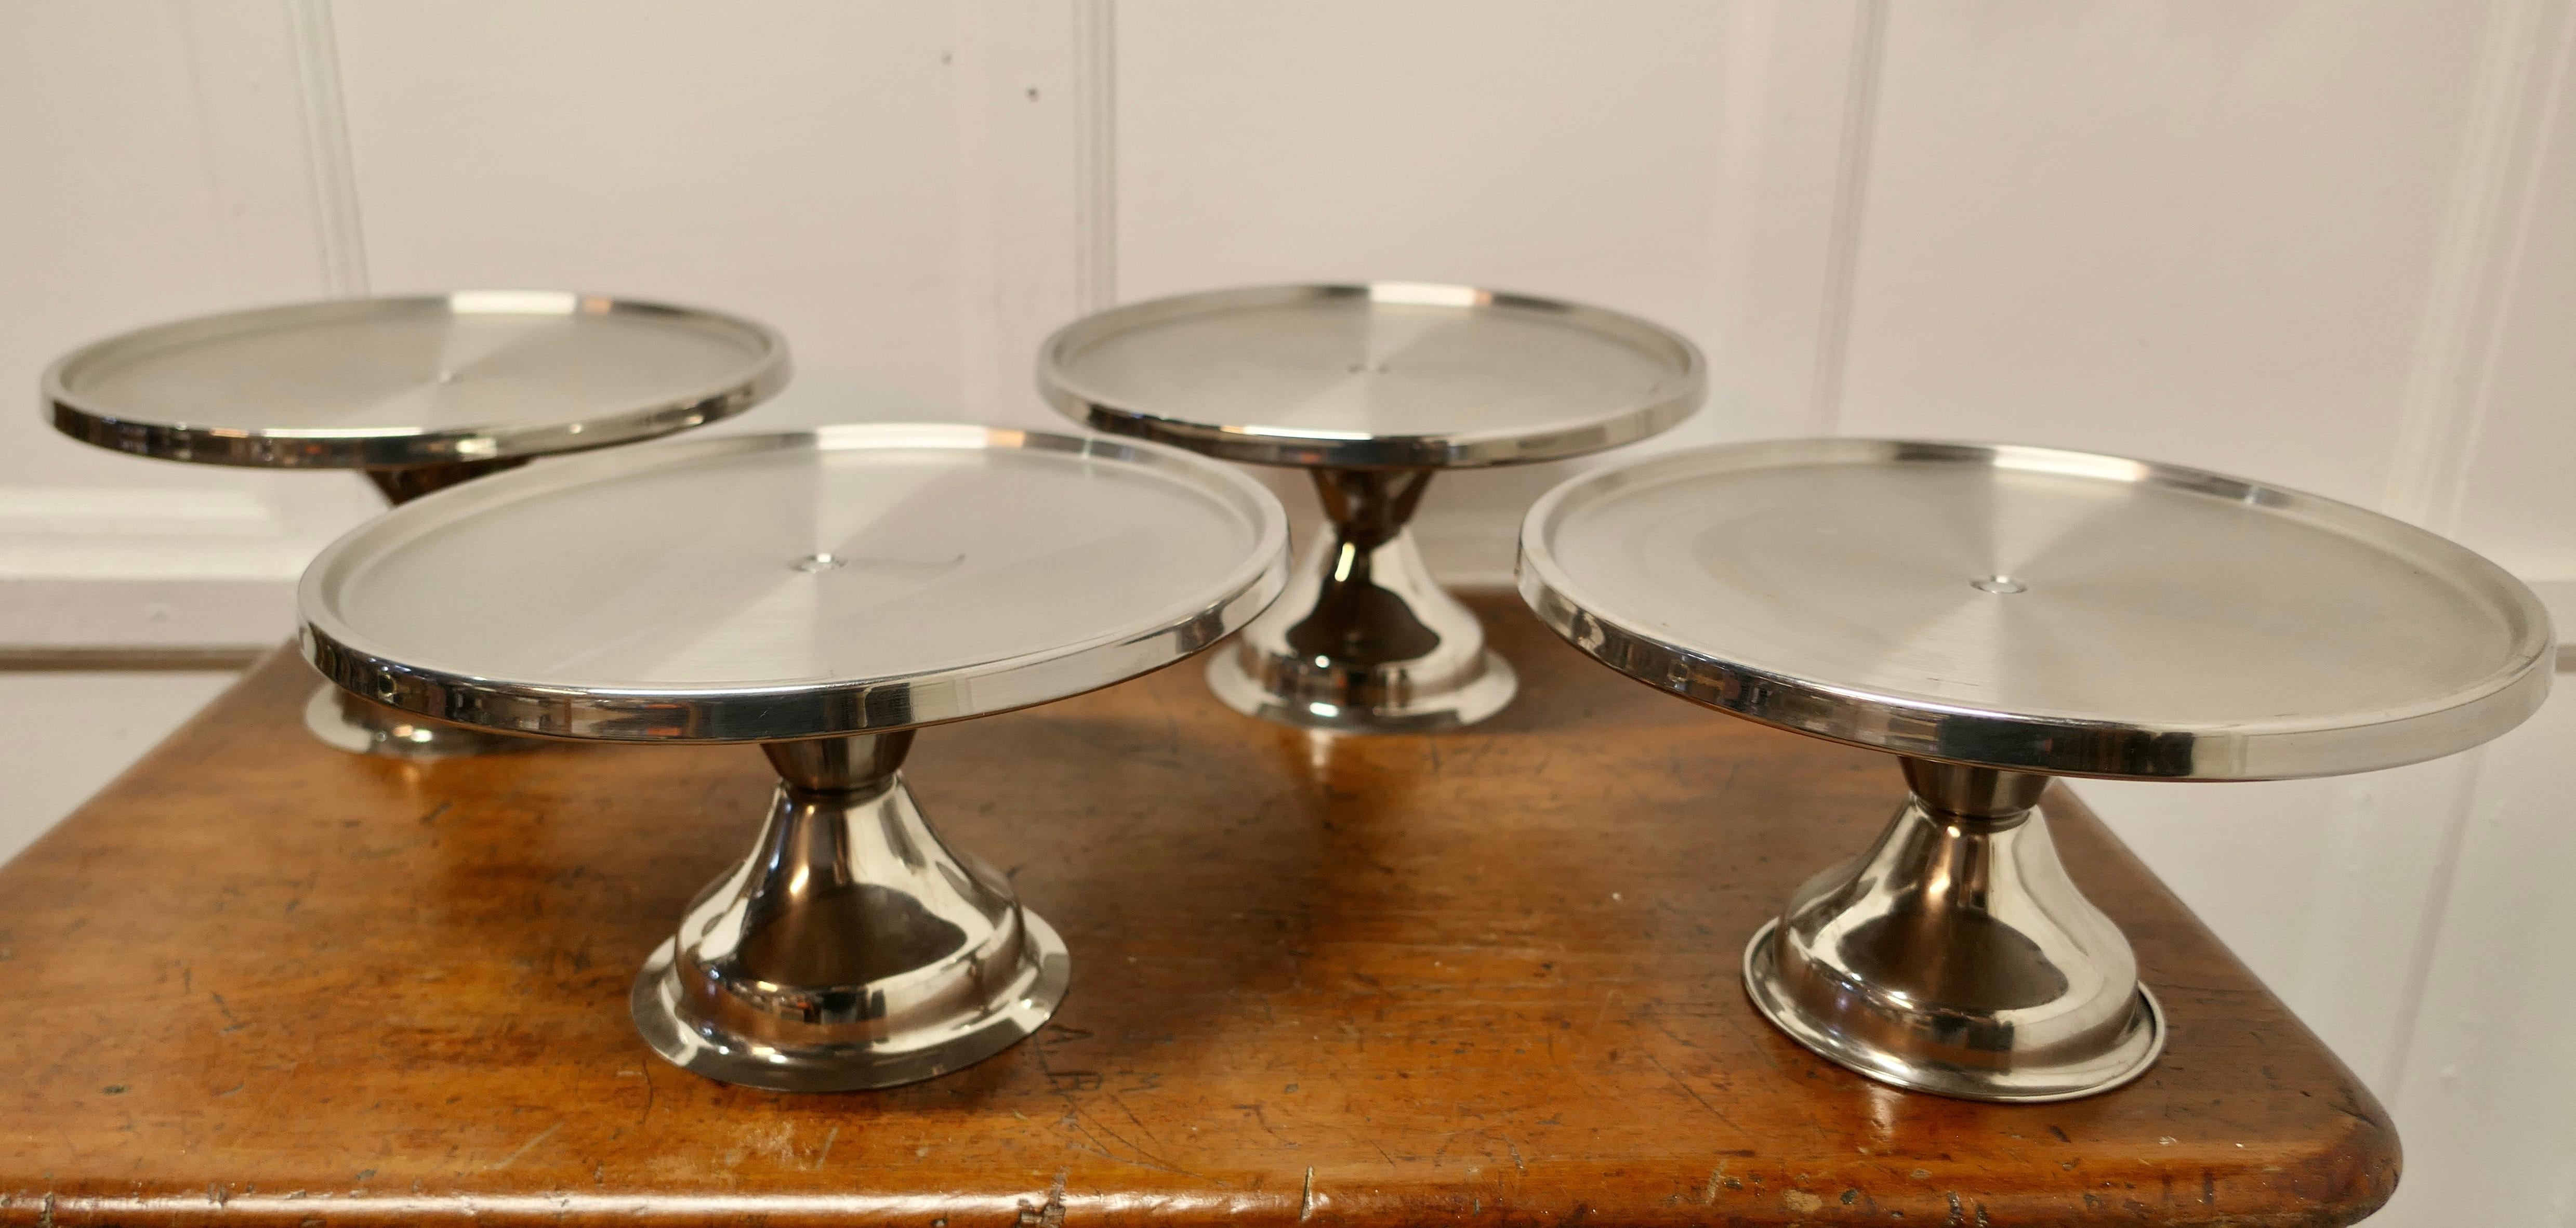 Stylish Stainless Steel Tazza Set of 4 Large Dishes

A  stylish mid century set with flat tops, standing on a circular base 

The Plates are 13”high and 7” in diameter
TSW50